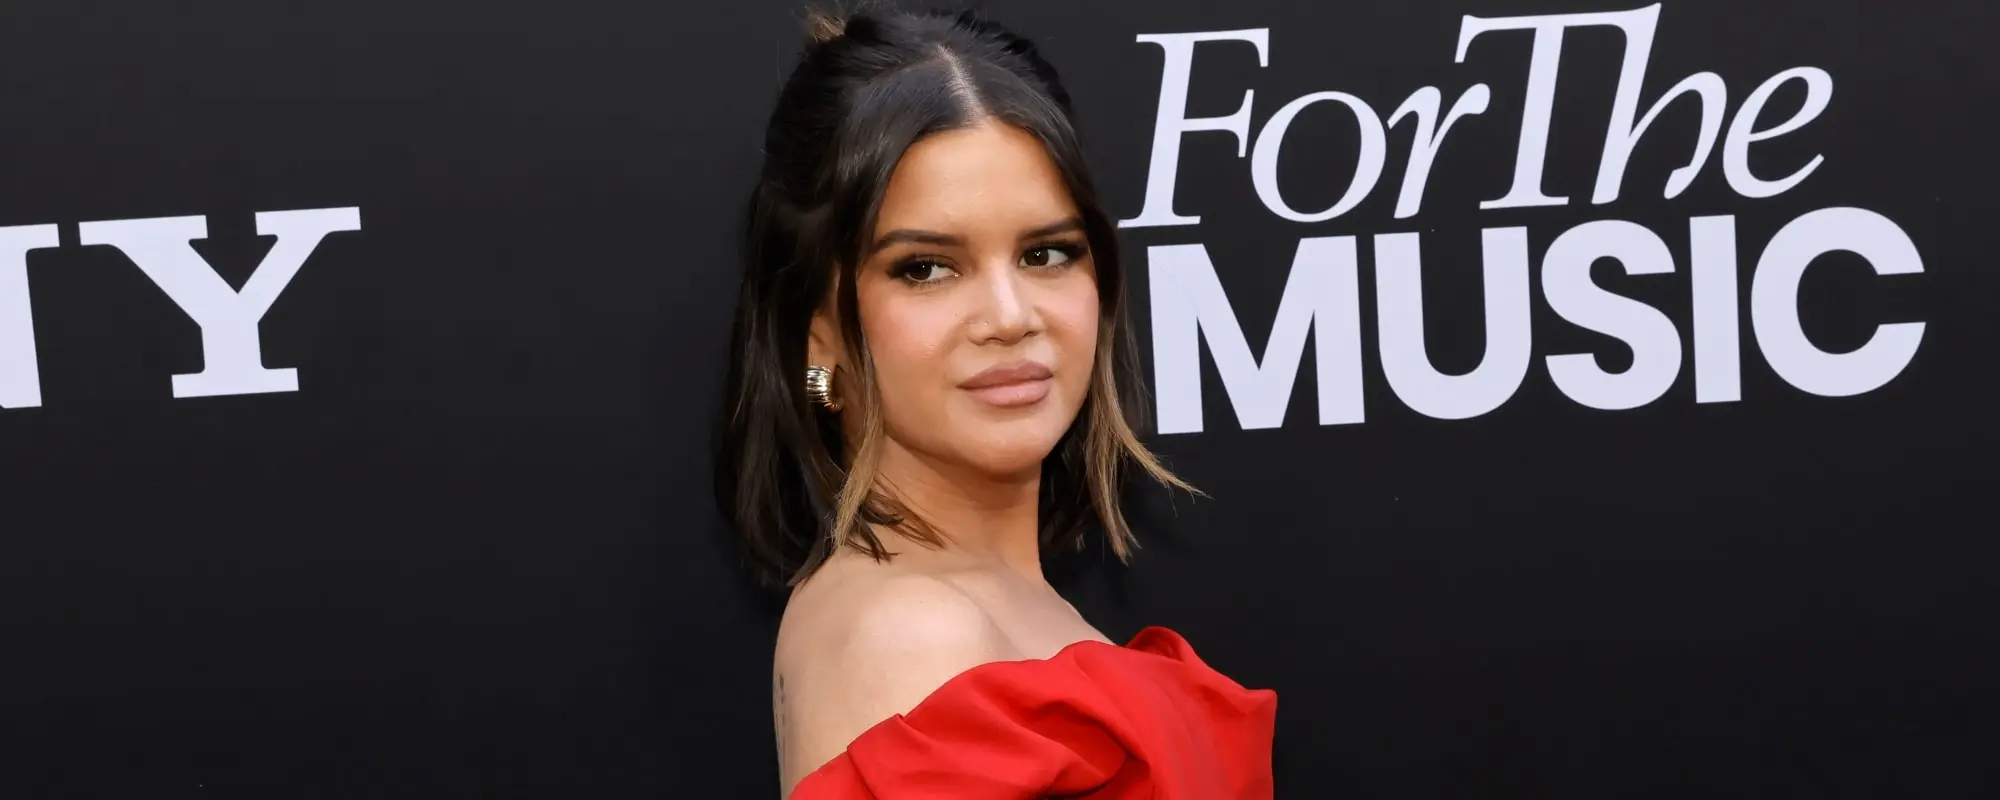 Maren Morris Was Sick While Recording Song with Teddy Swims (Exclusive)